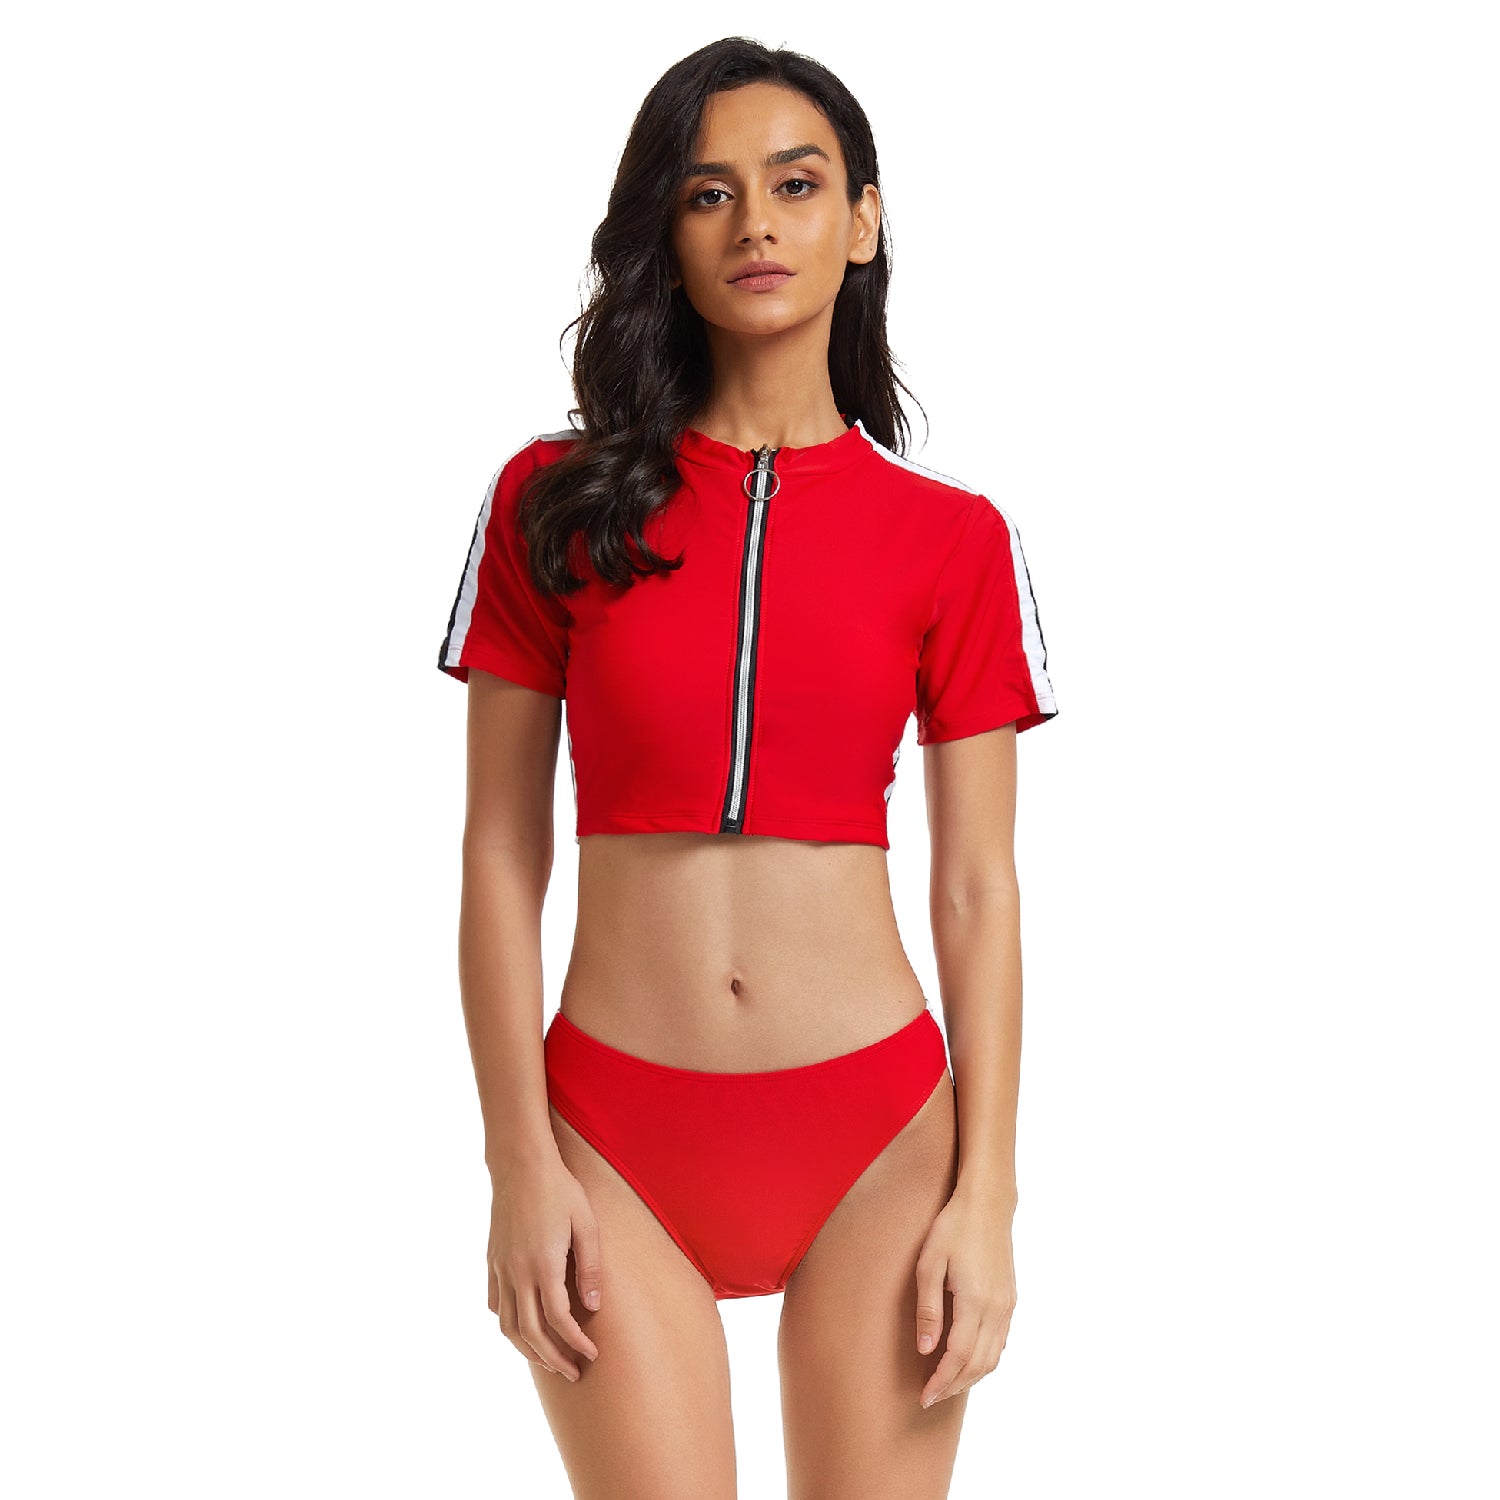 Short Sleeve Swimsuits Crop Top Surfing Suits Red Rash Guard